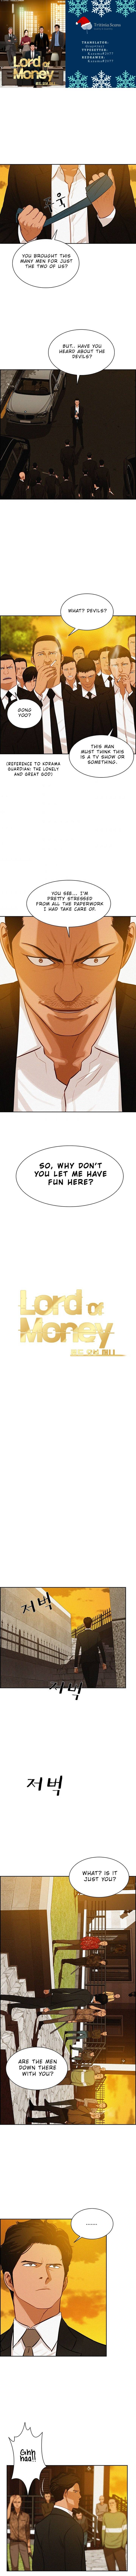 Lord Of Money - Page 1